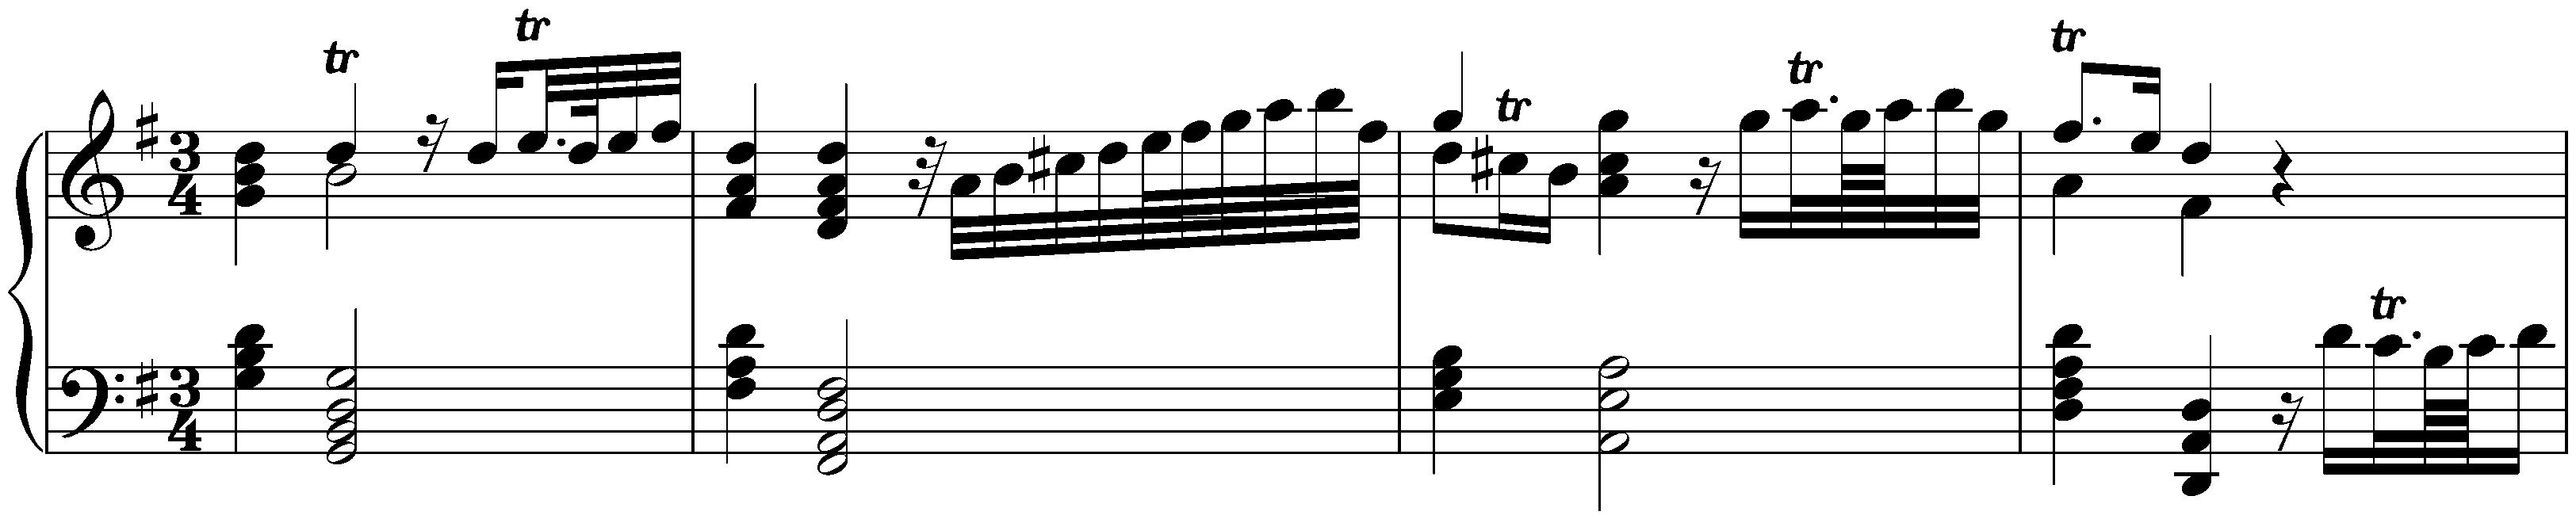 Chaconne in G major, HWV 435 (fifth version)